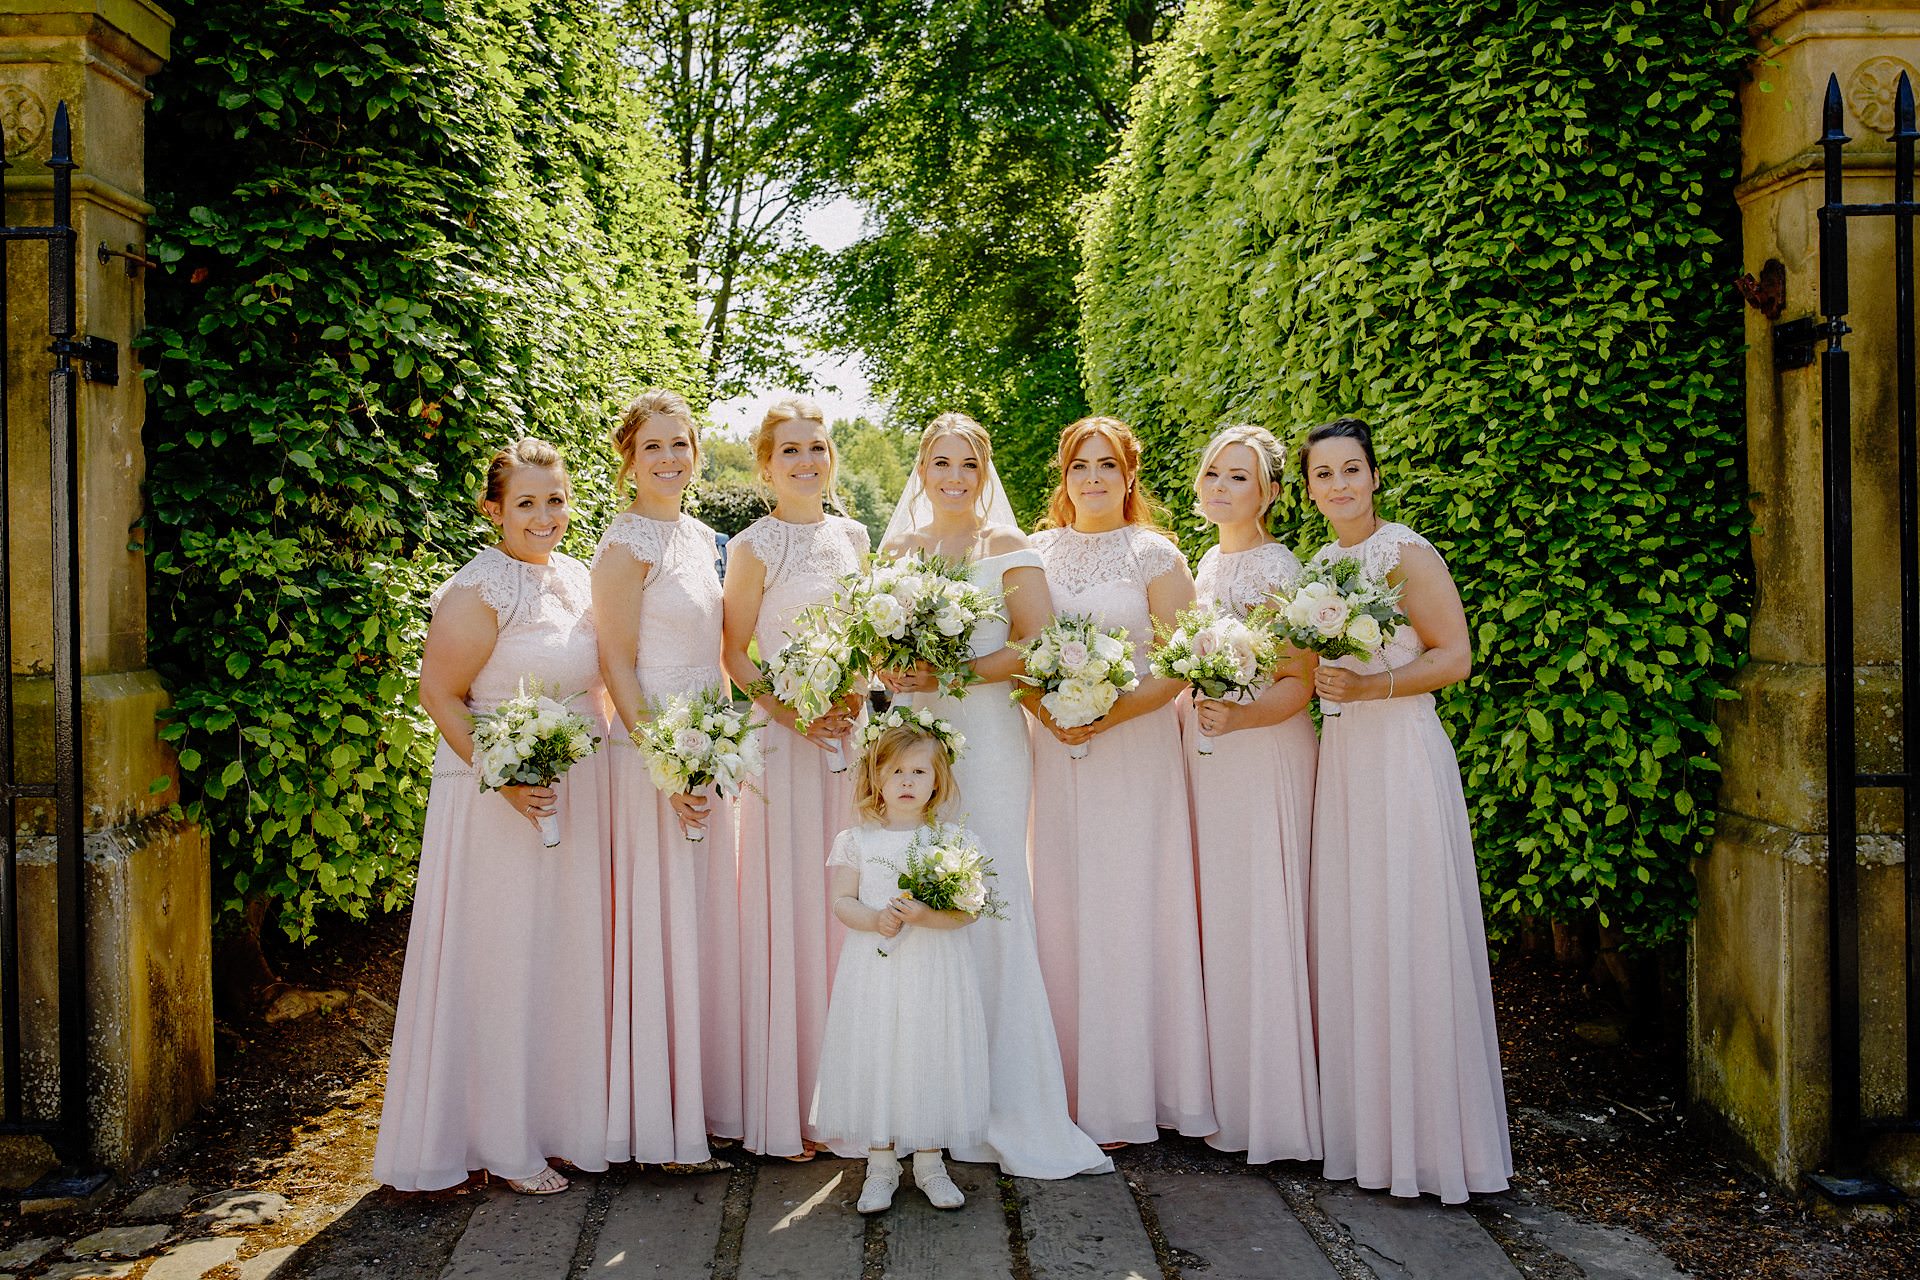 group photo of the bride and bridesmaids at meols hall, southport by steven rooney